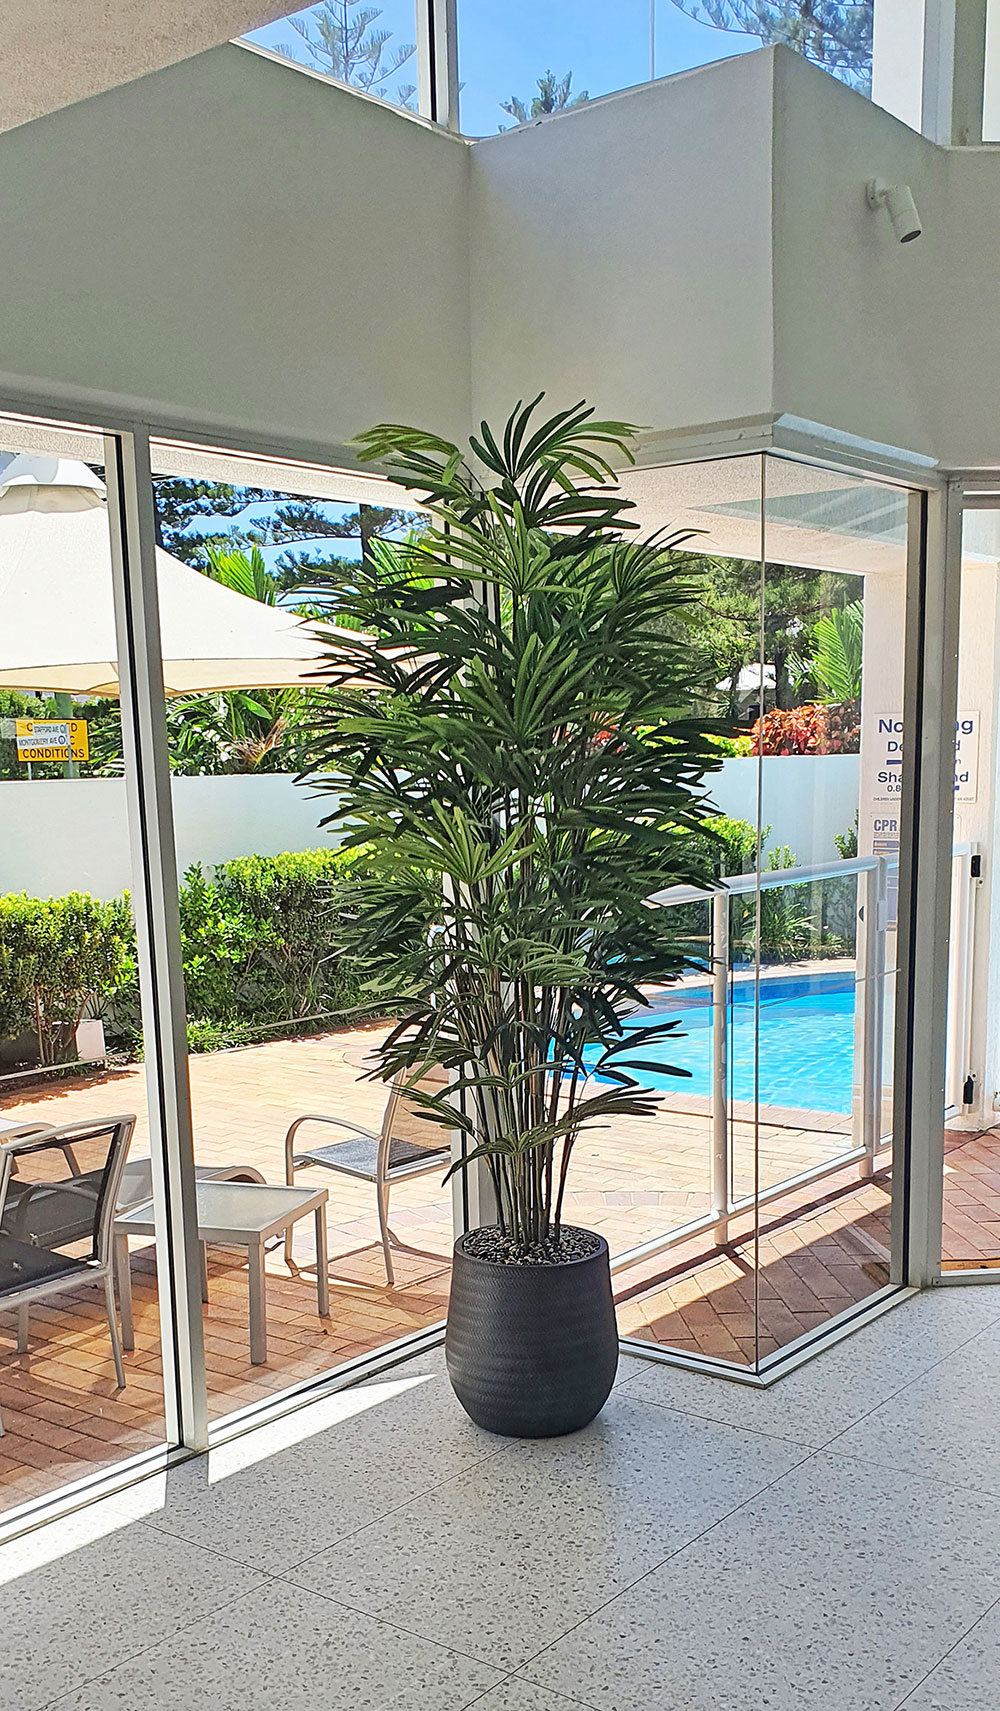 Elegant Palm in tall planter in Appartment Foyer